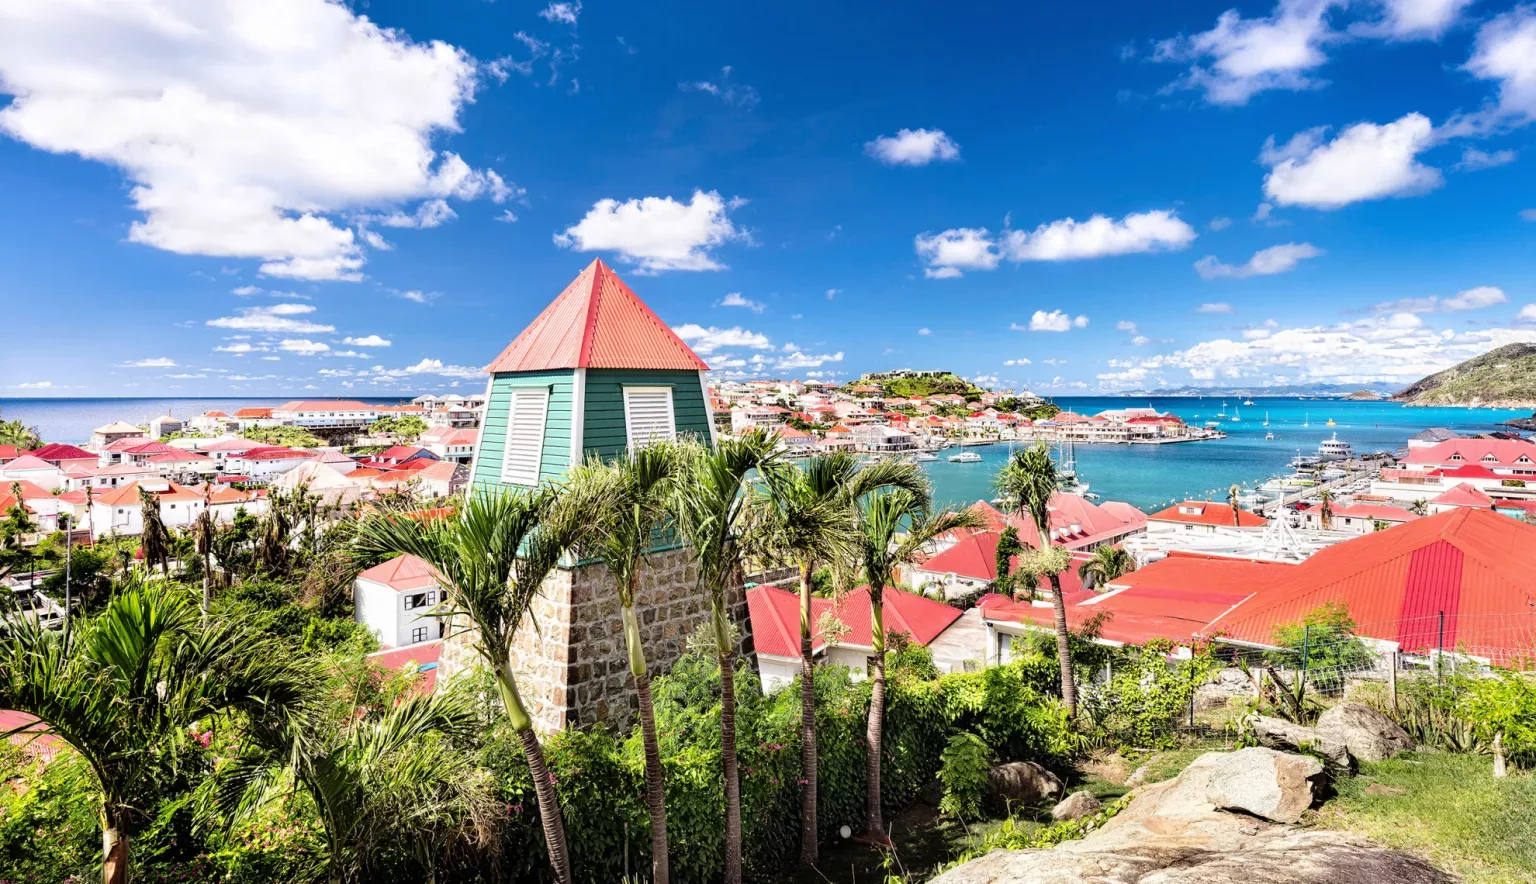 St. Barthelemy Vacation Packages, St. Barth Offers